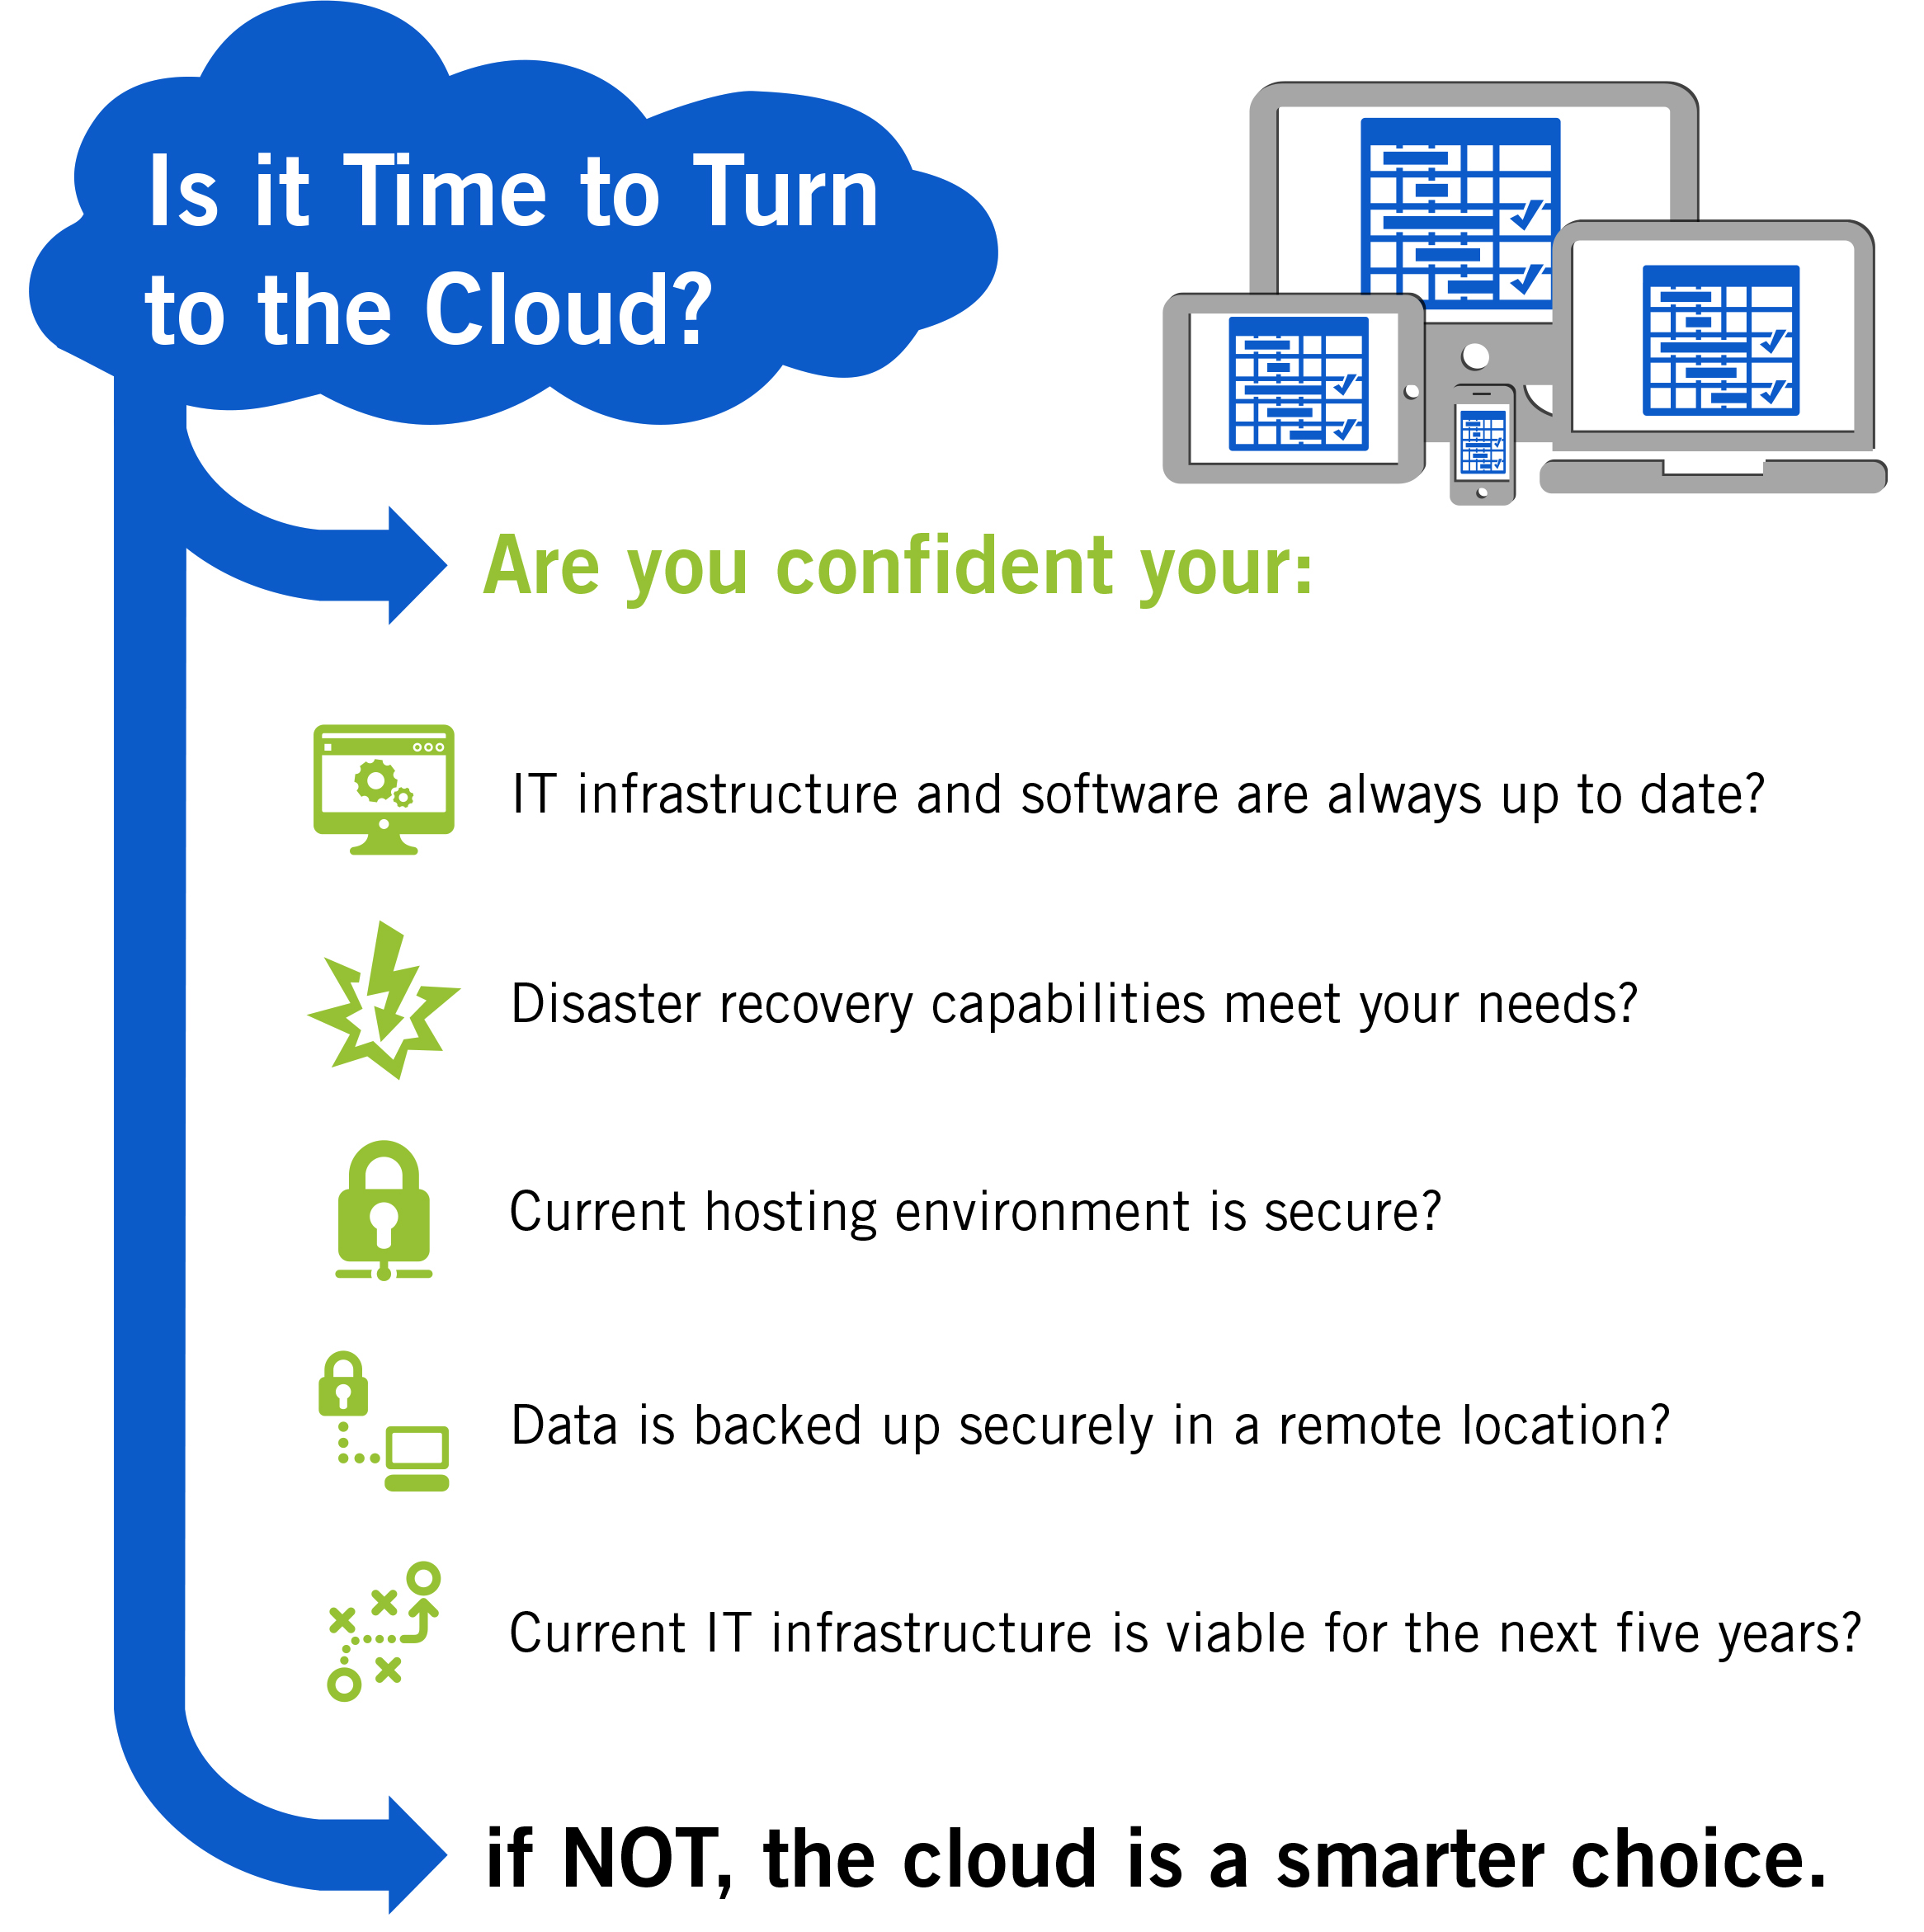 Is it time to turn to the cloud?